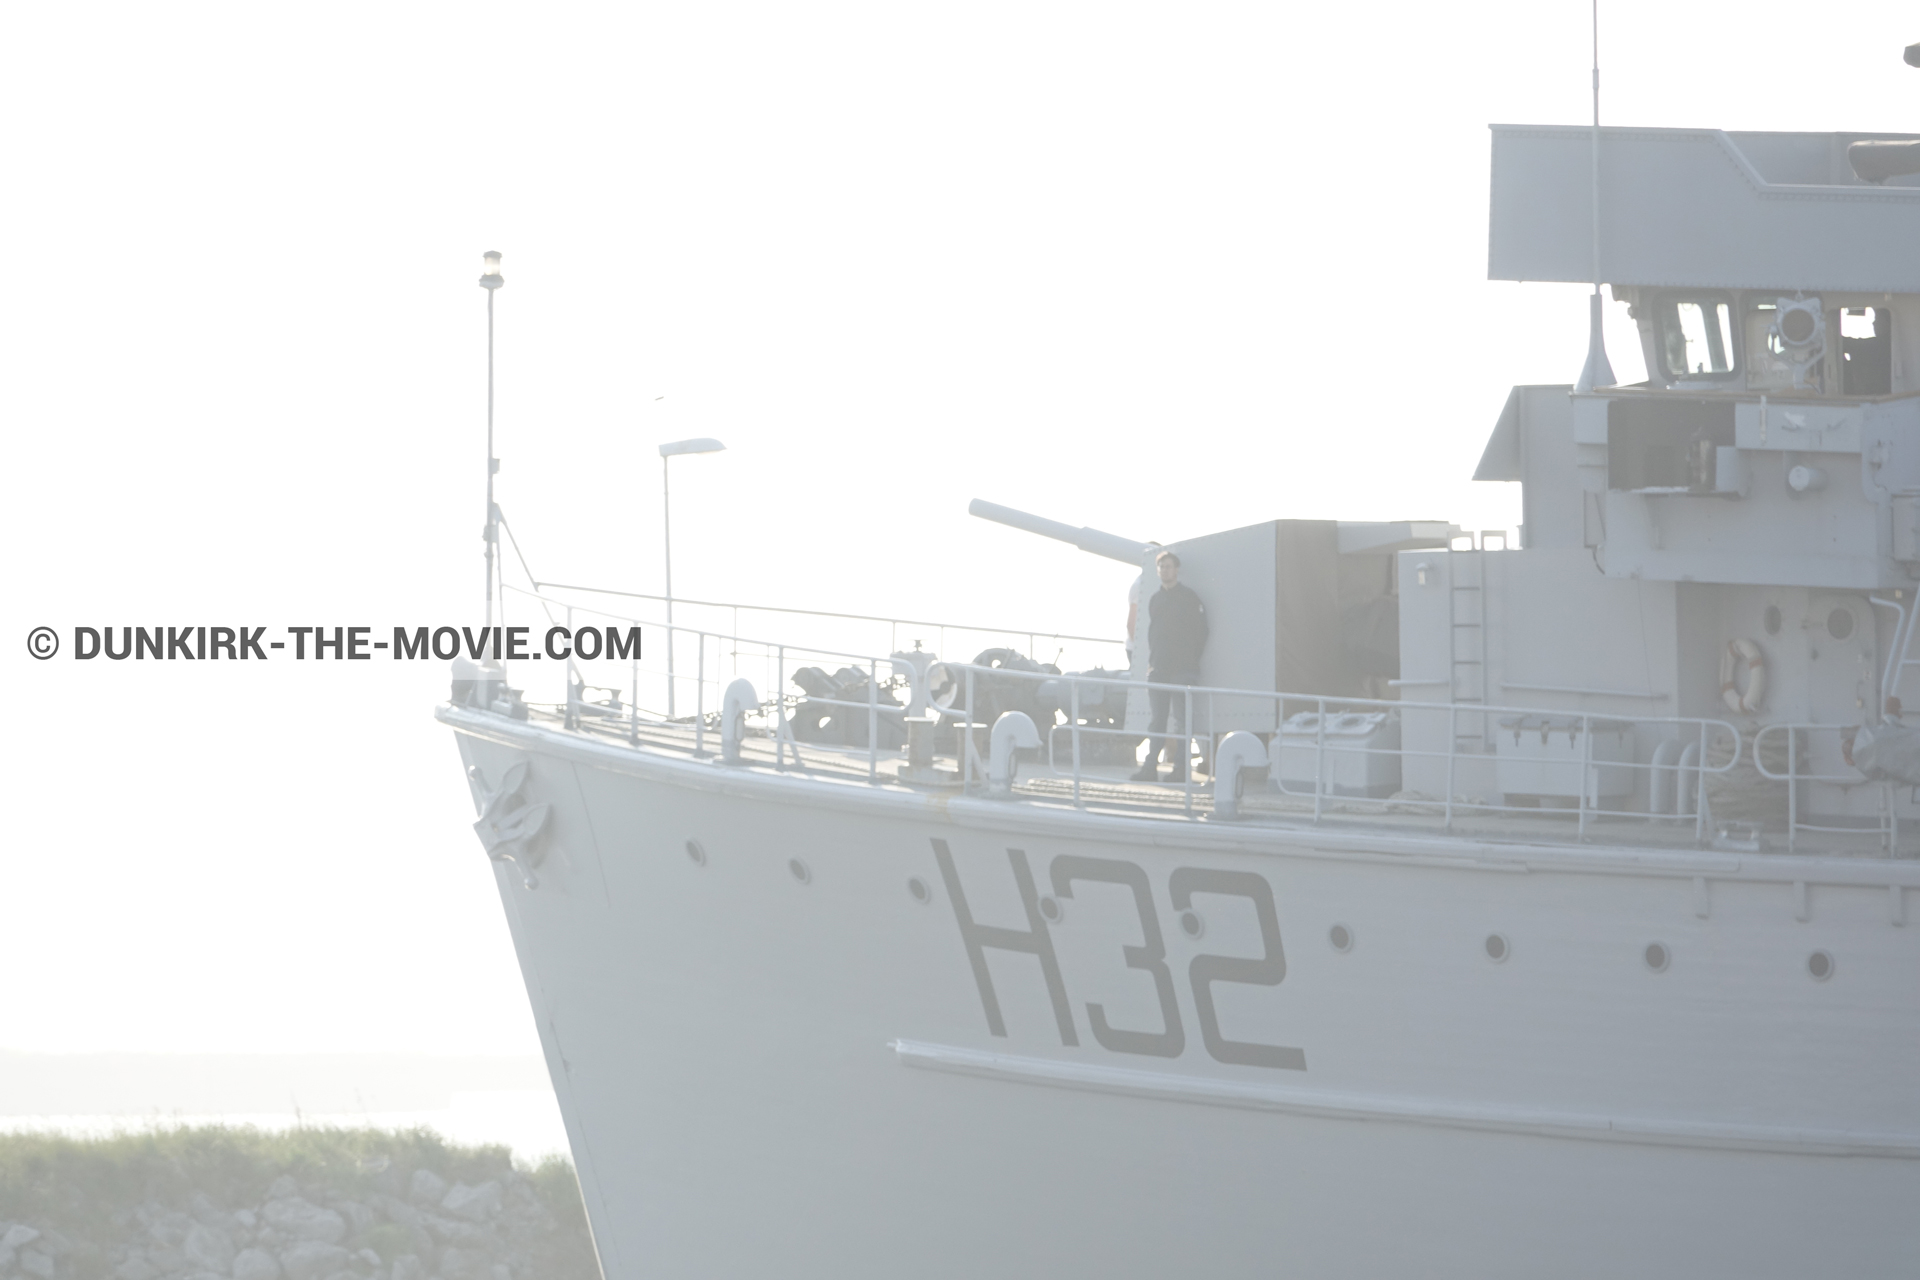 Picture with H32 - Hr.Ms. Sittard,  from behind the scene of the Dunkirk movie by Nolan